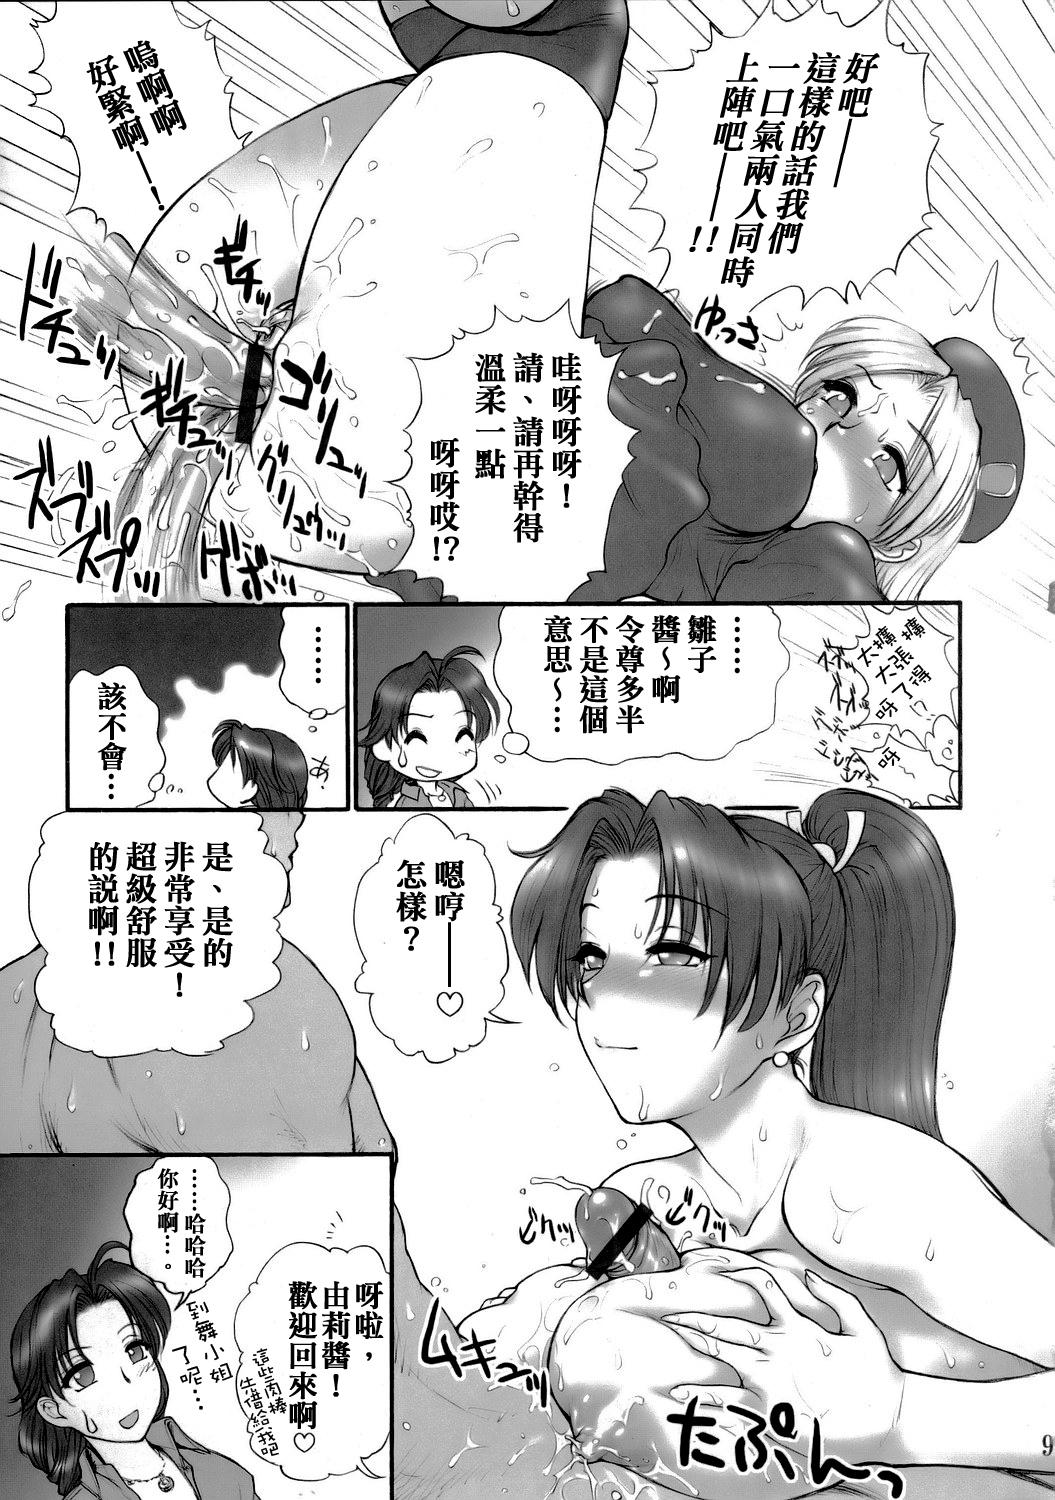 Xxx (SC29) [Shinnihon Pepsitou (St. Germain-sal)] Report Concerning Kyoku-gen-ryuu (The King of Fighters) [Chinese] [日祈漢化] - King of fighters Sloppy - Page 11